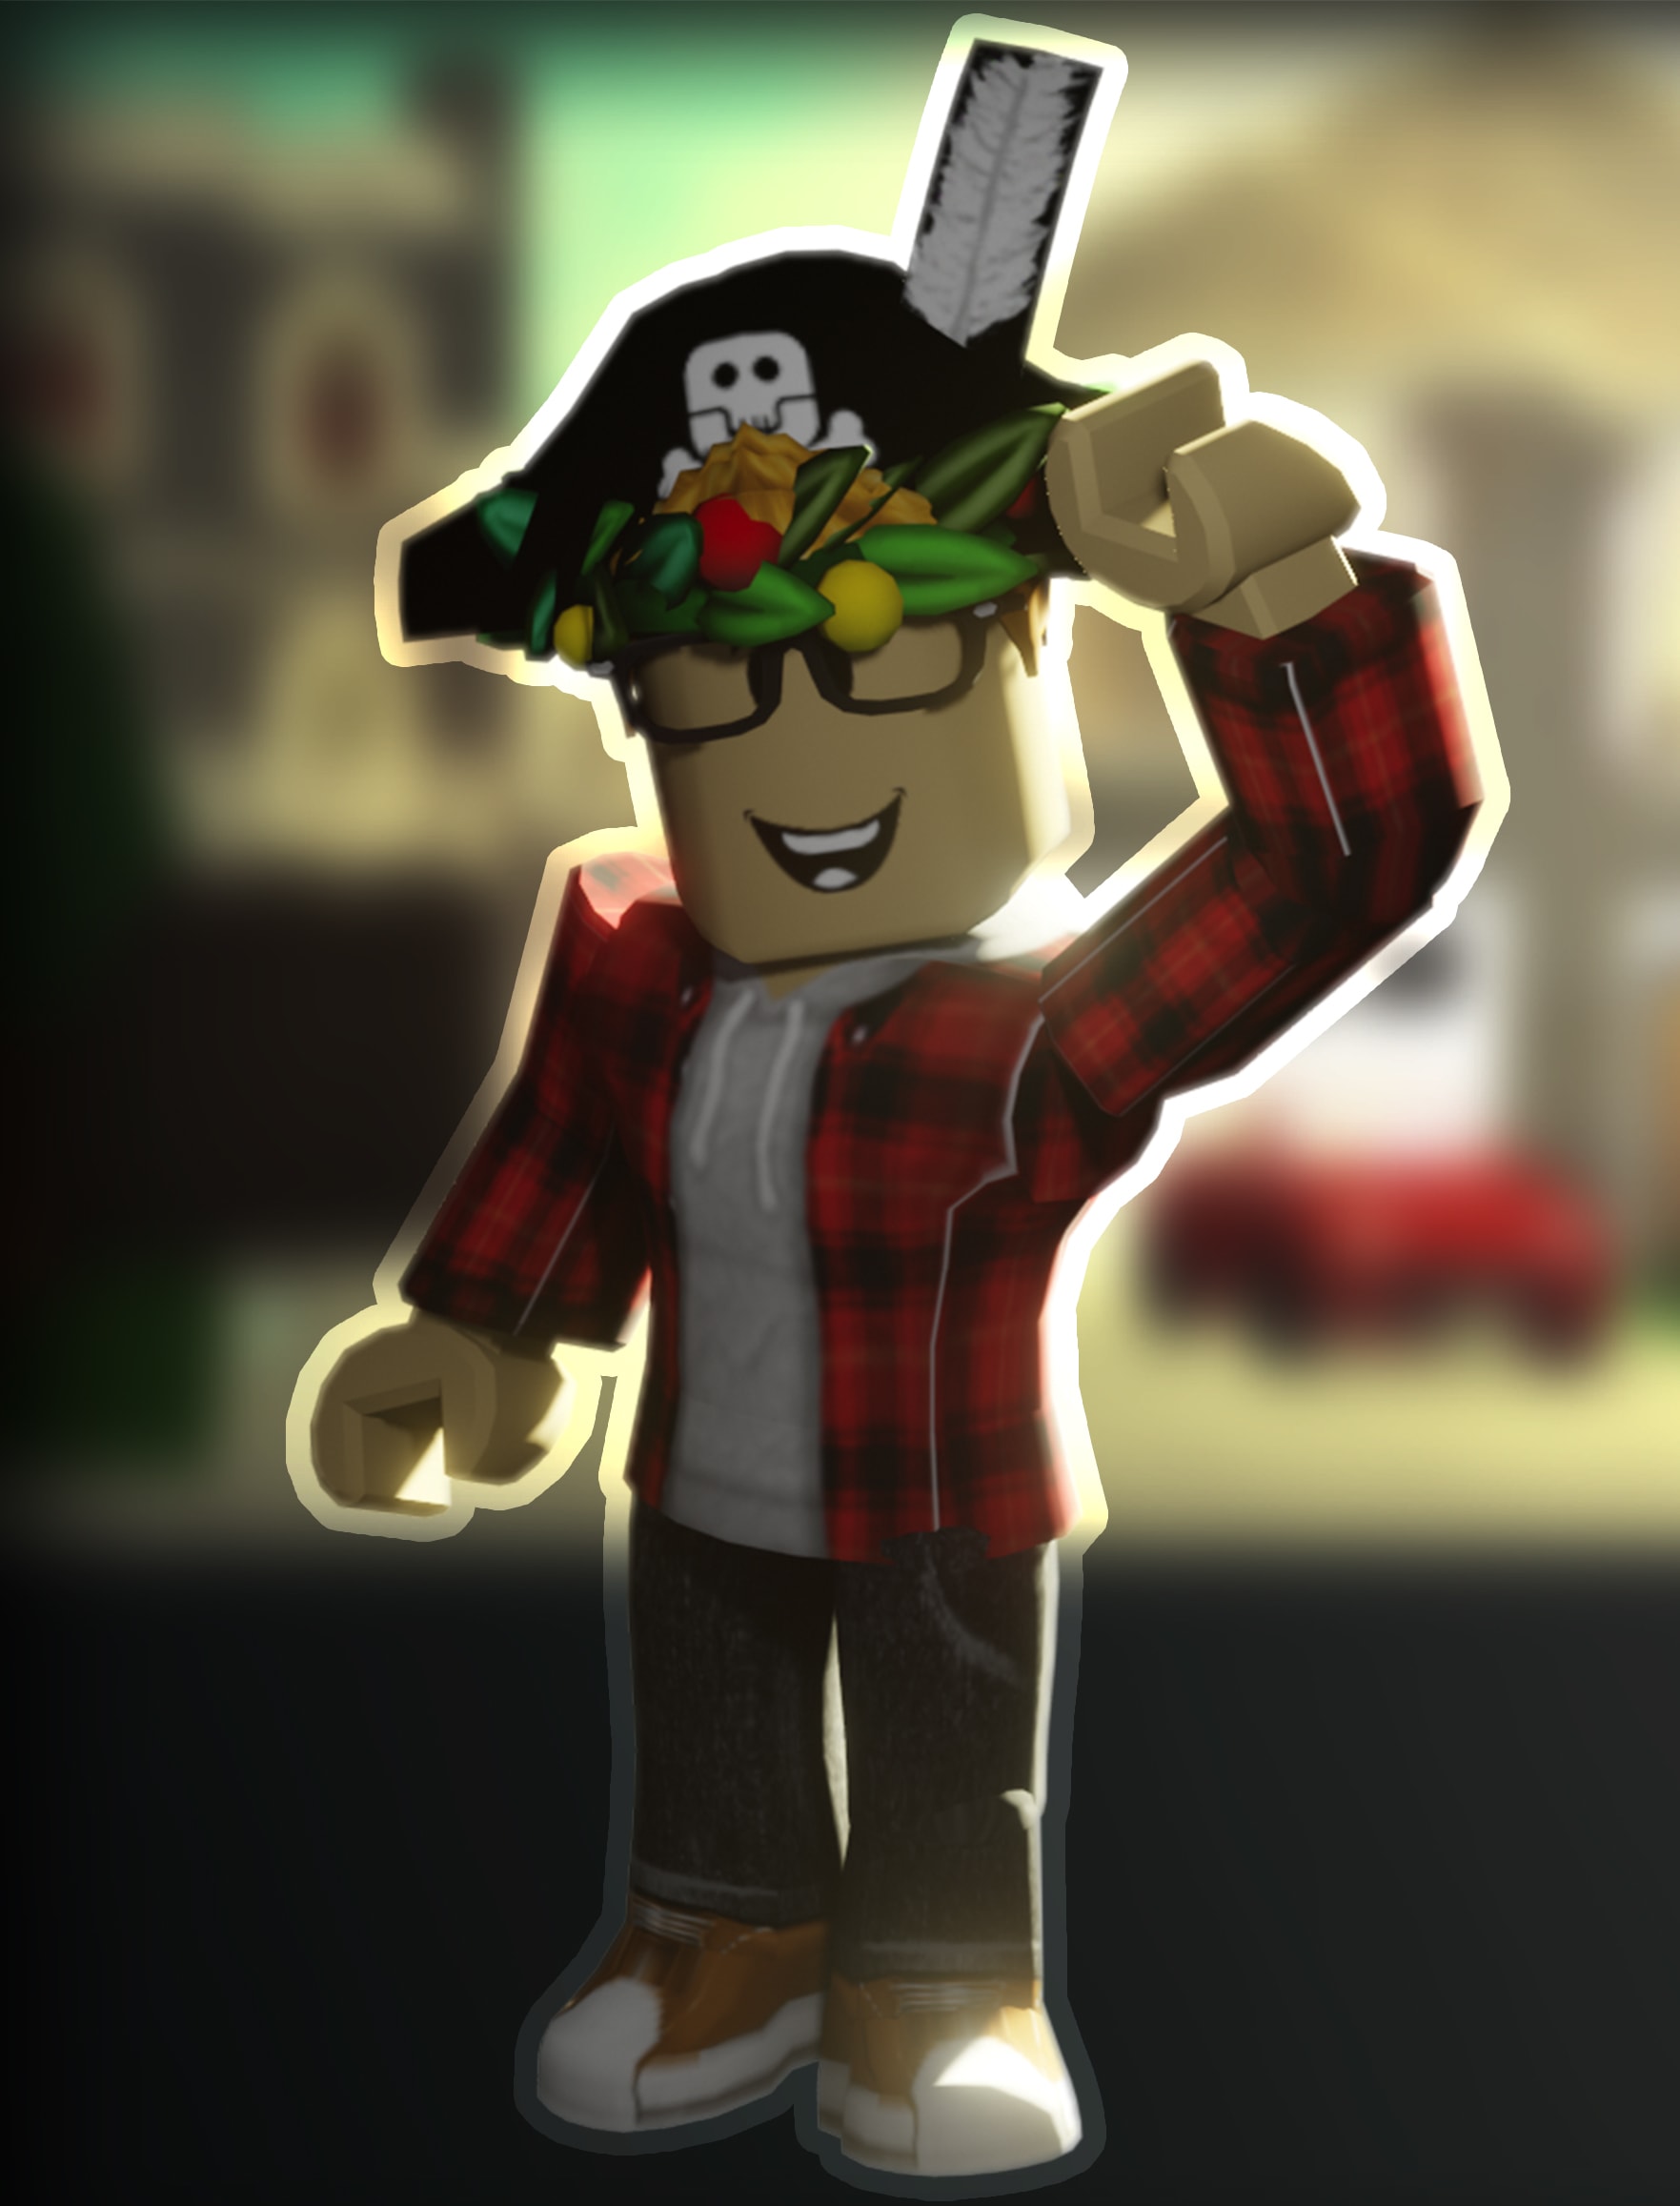 Render And Photoshop Your Roblox Character By Isaiahrowell - roblox character obj file